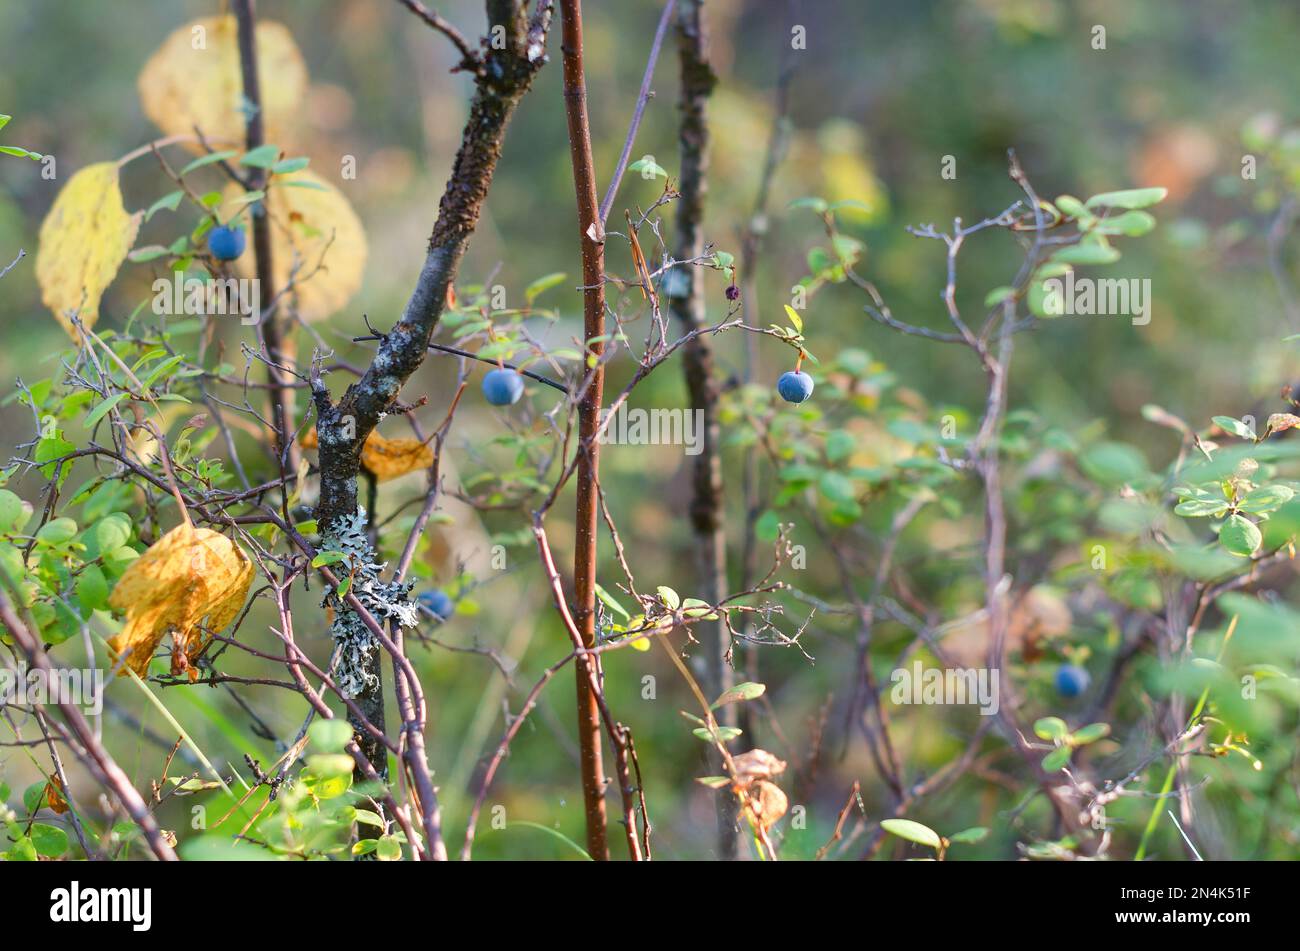 Blue juicy wild Northern blueberries grow in autumn on a Bush in multi-colored vegetation with yellow leaves and a mossy tree trunk in the Yakut fores Stock Photo